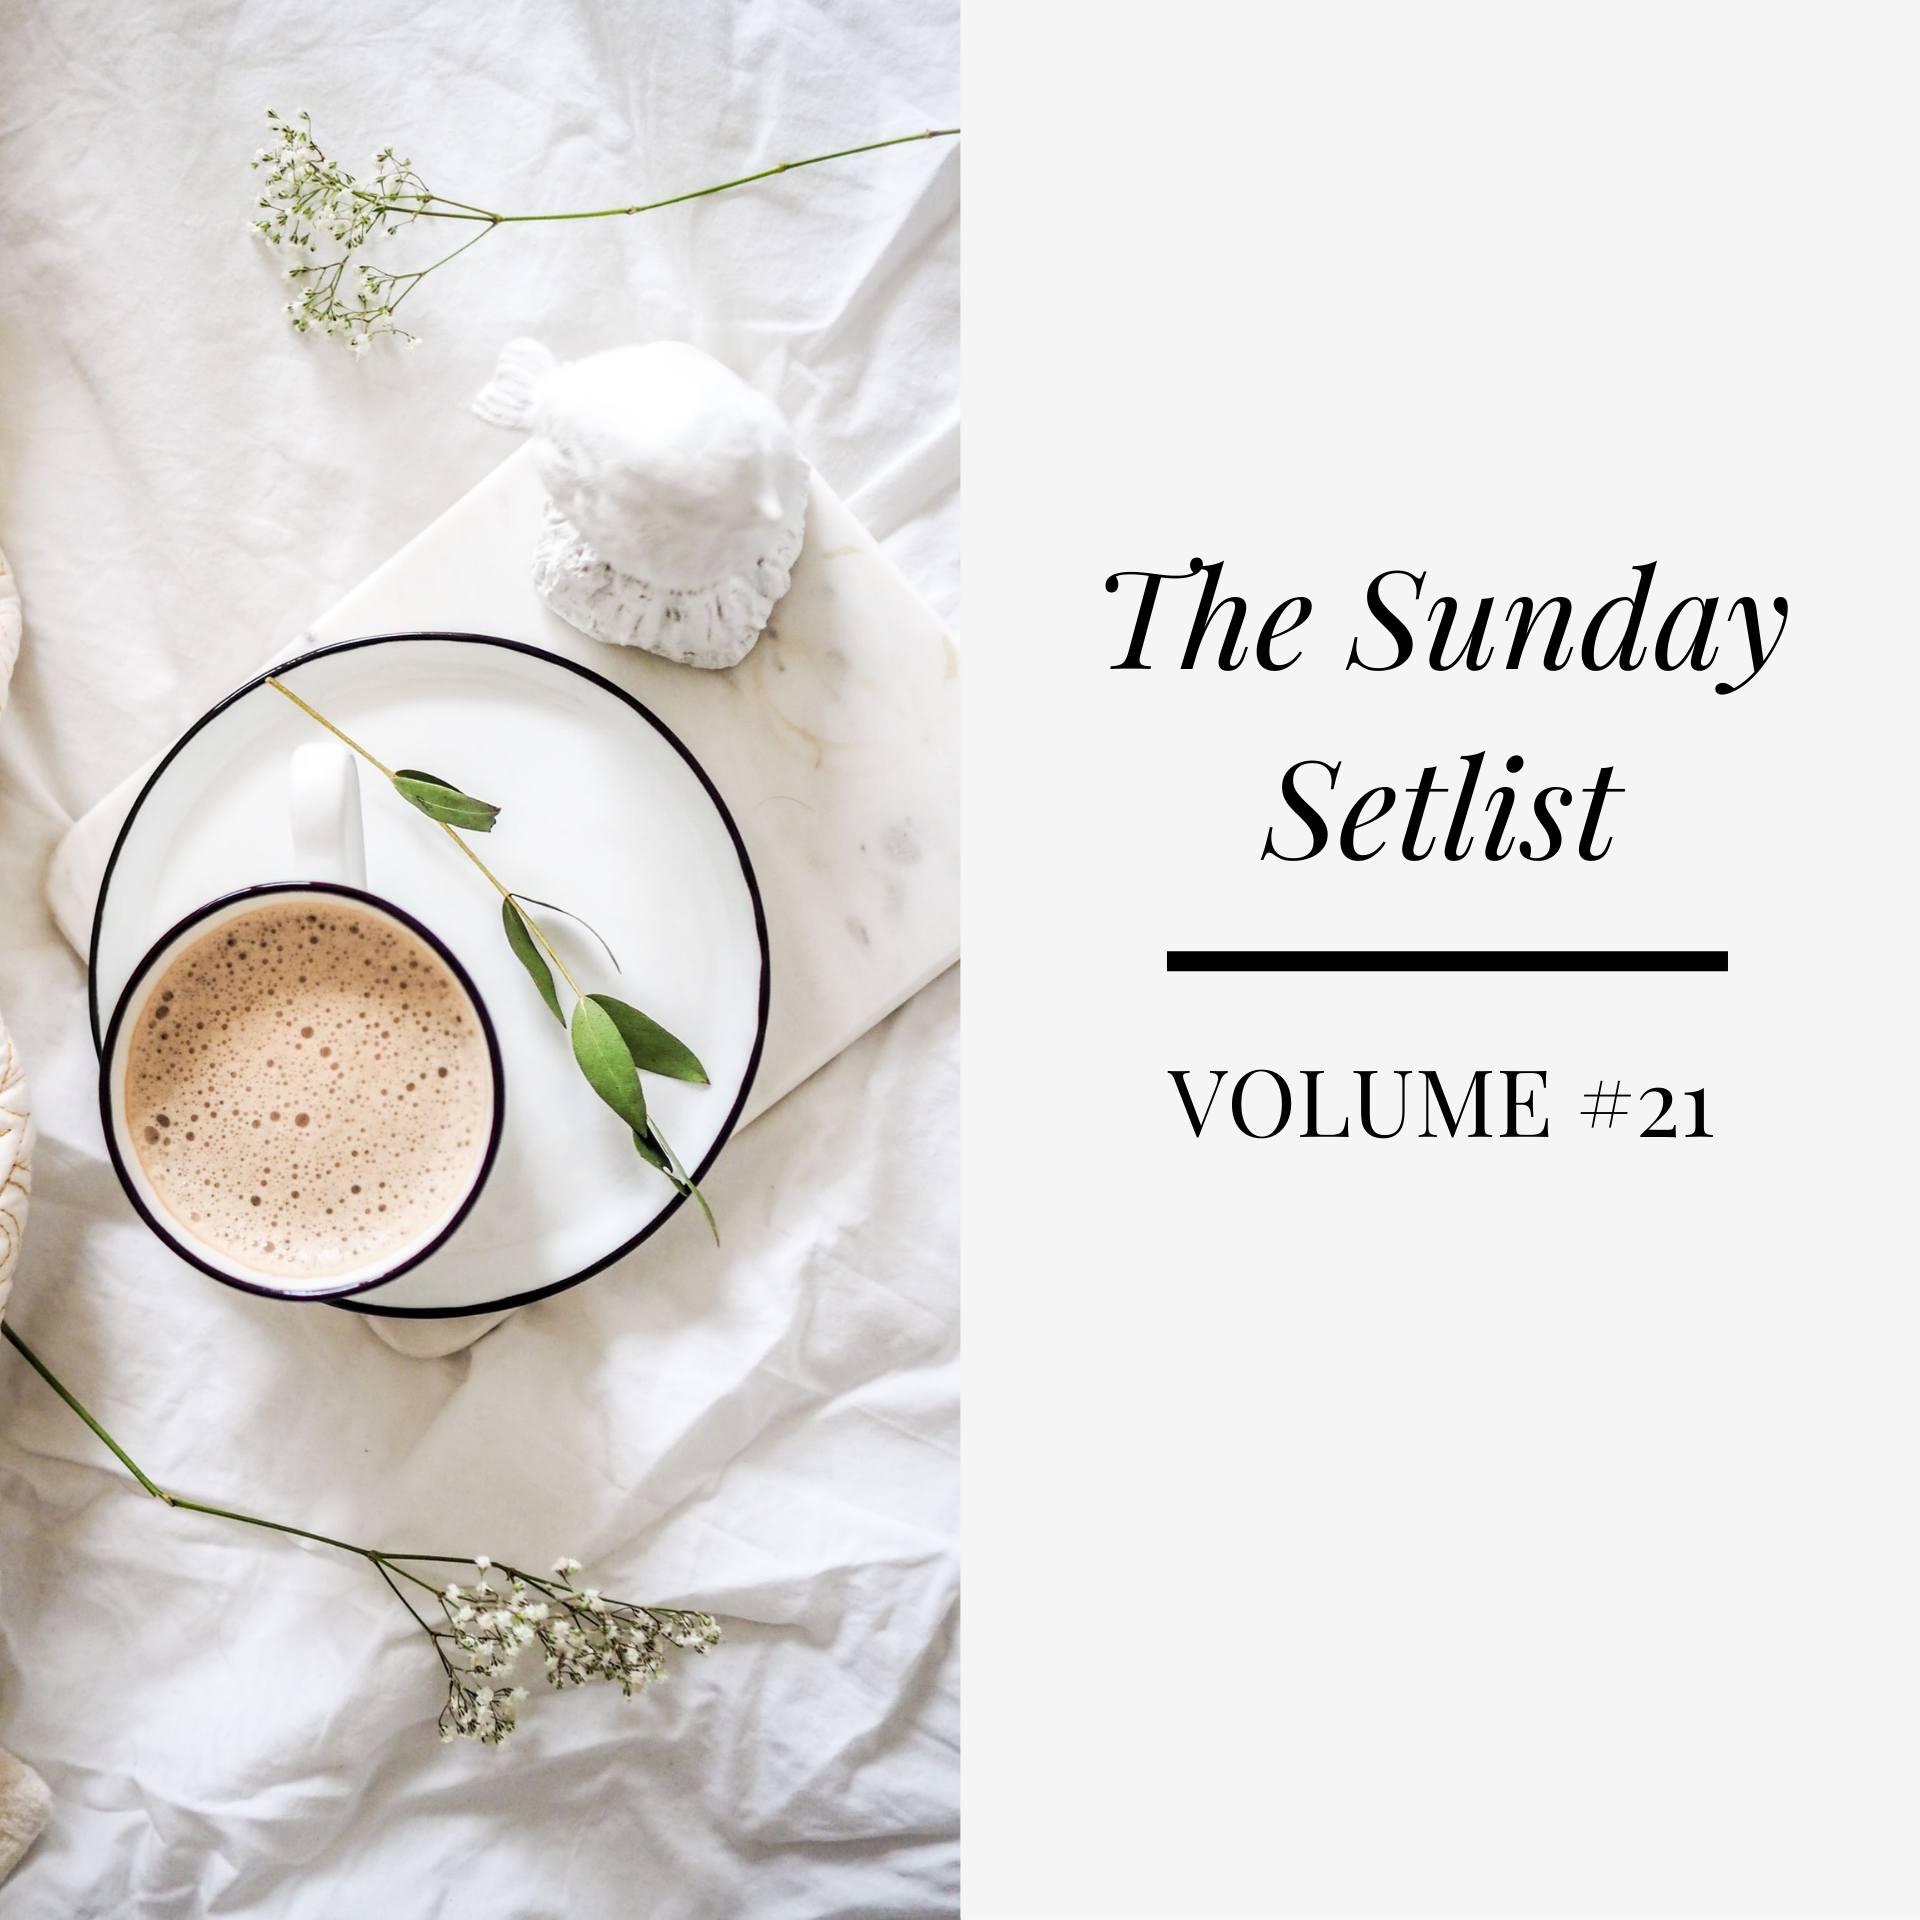 [The Sunday Setlist] BBQ + dirty course secrets from the inside